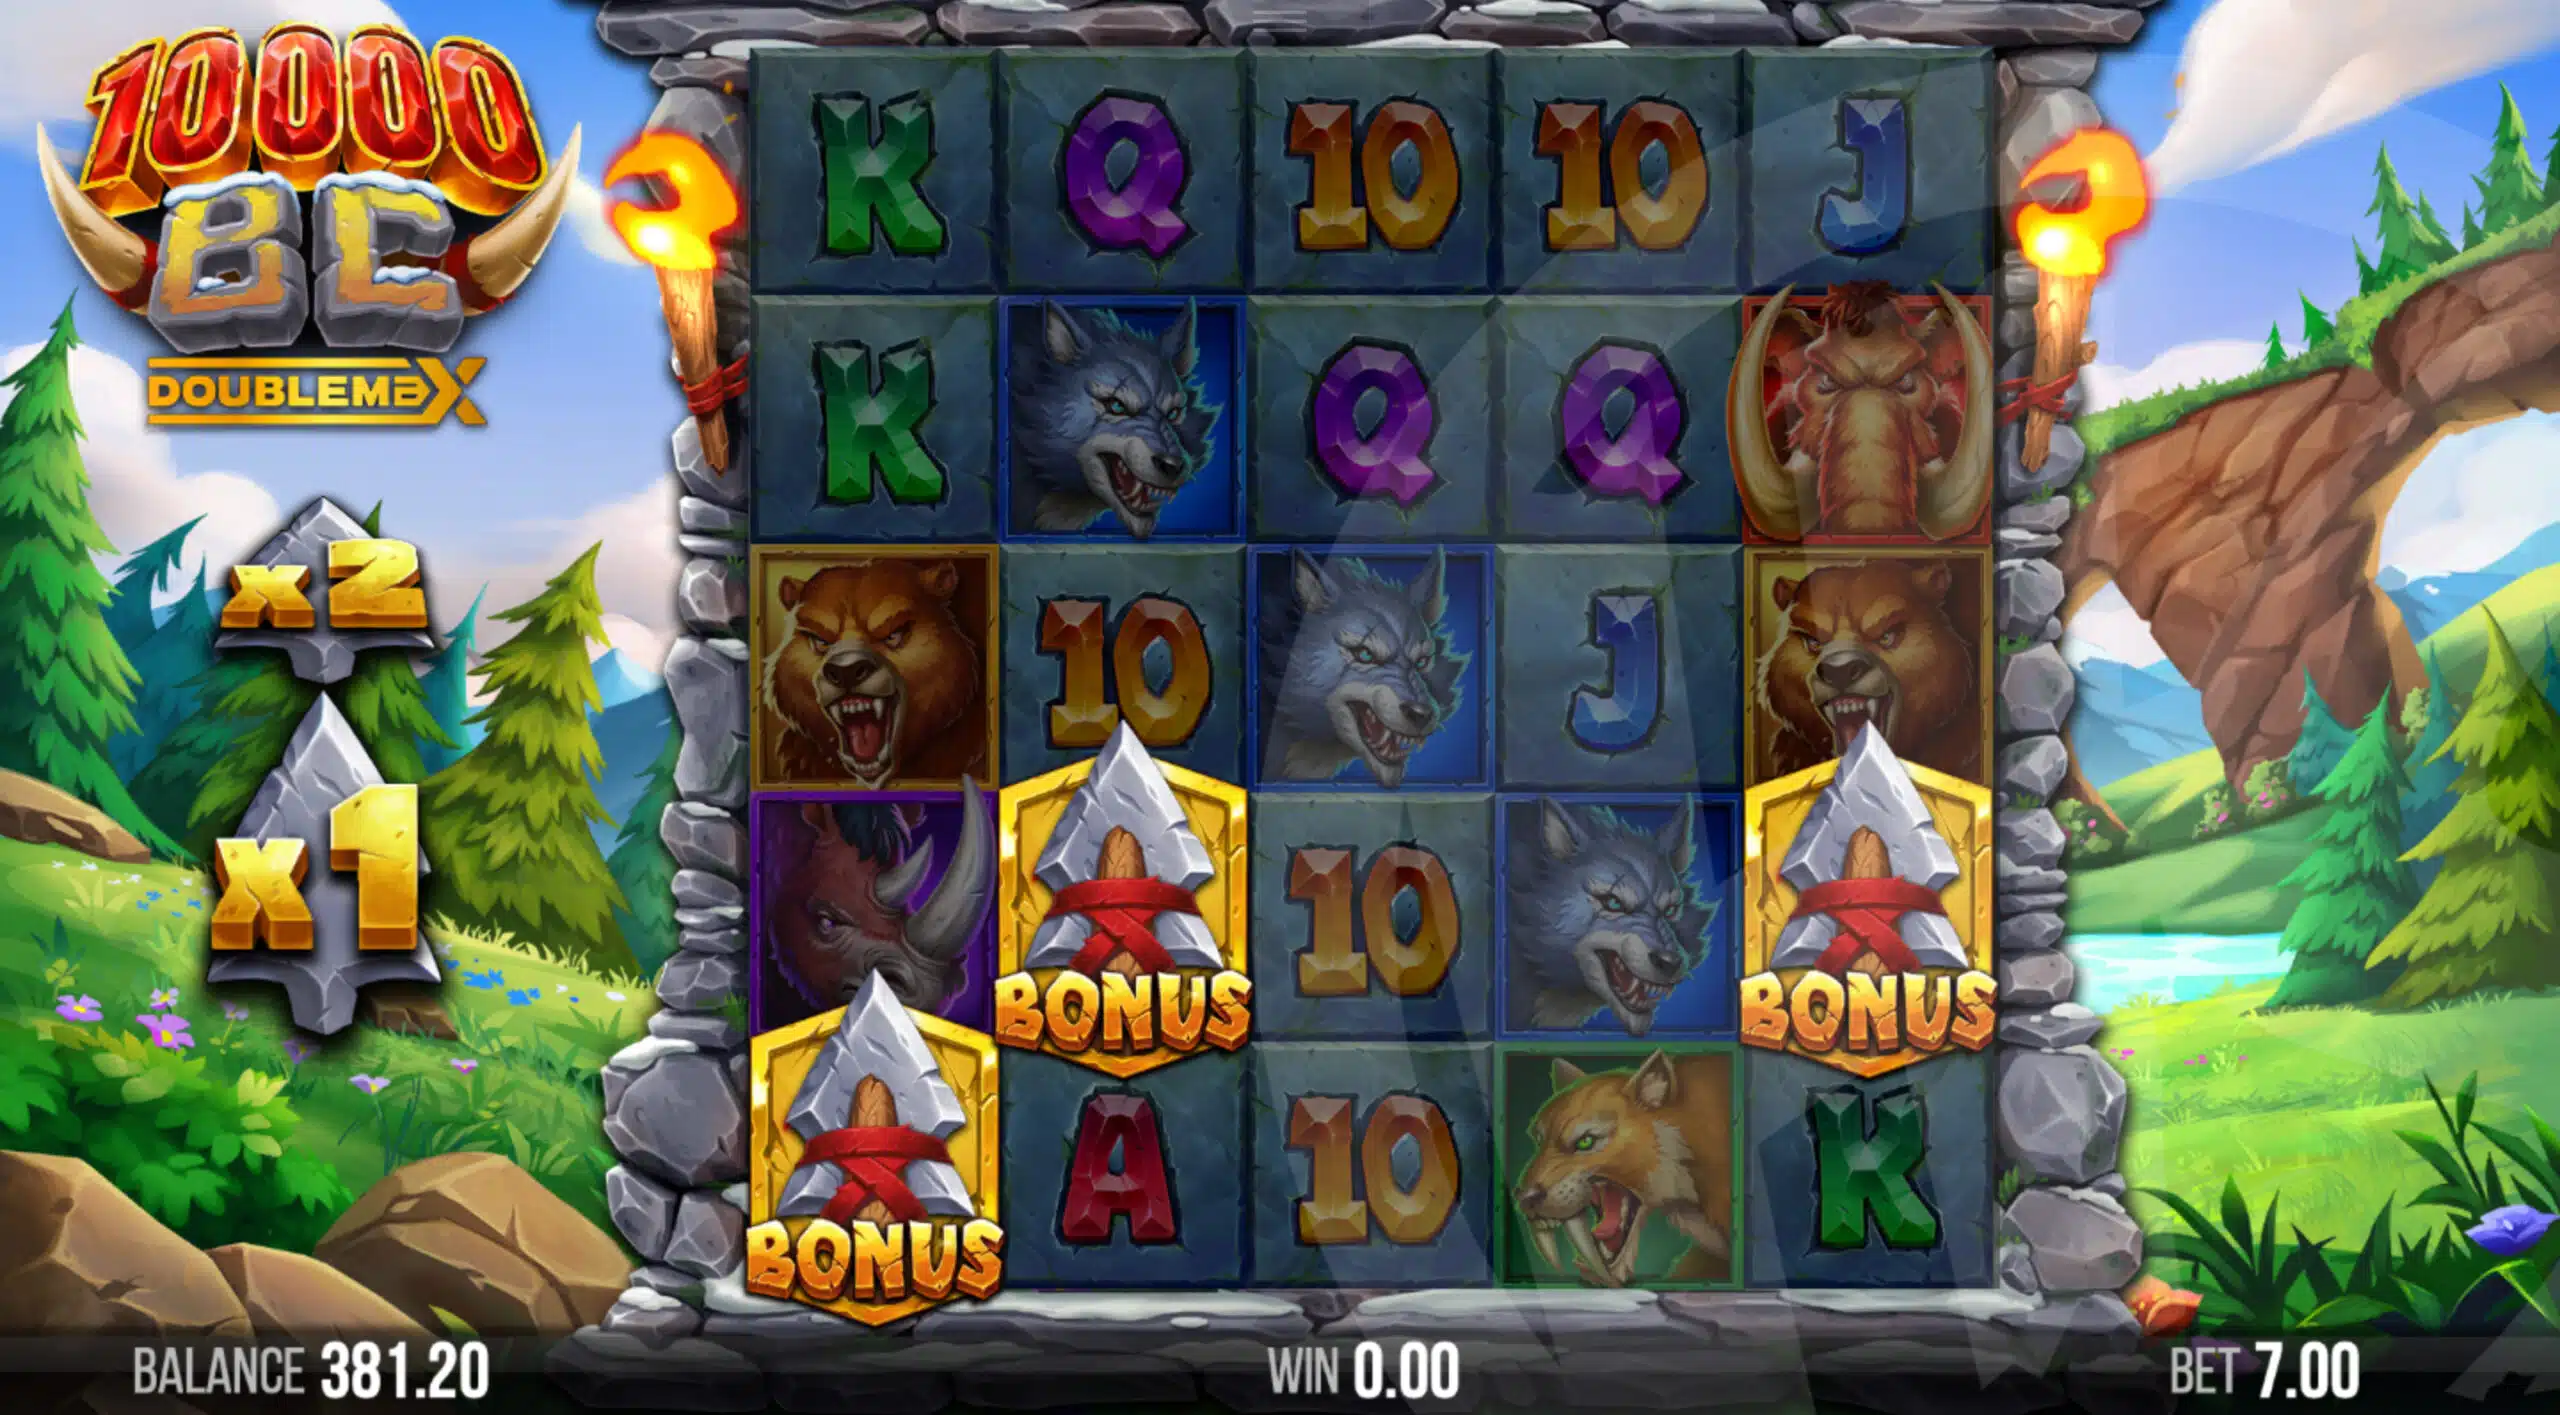 Land 3 or More Bonus Scatters to Trigger Free Spins